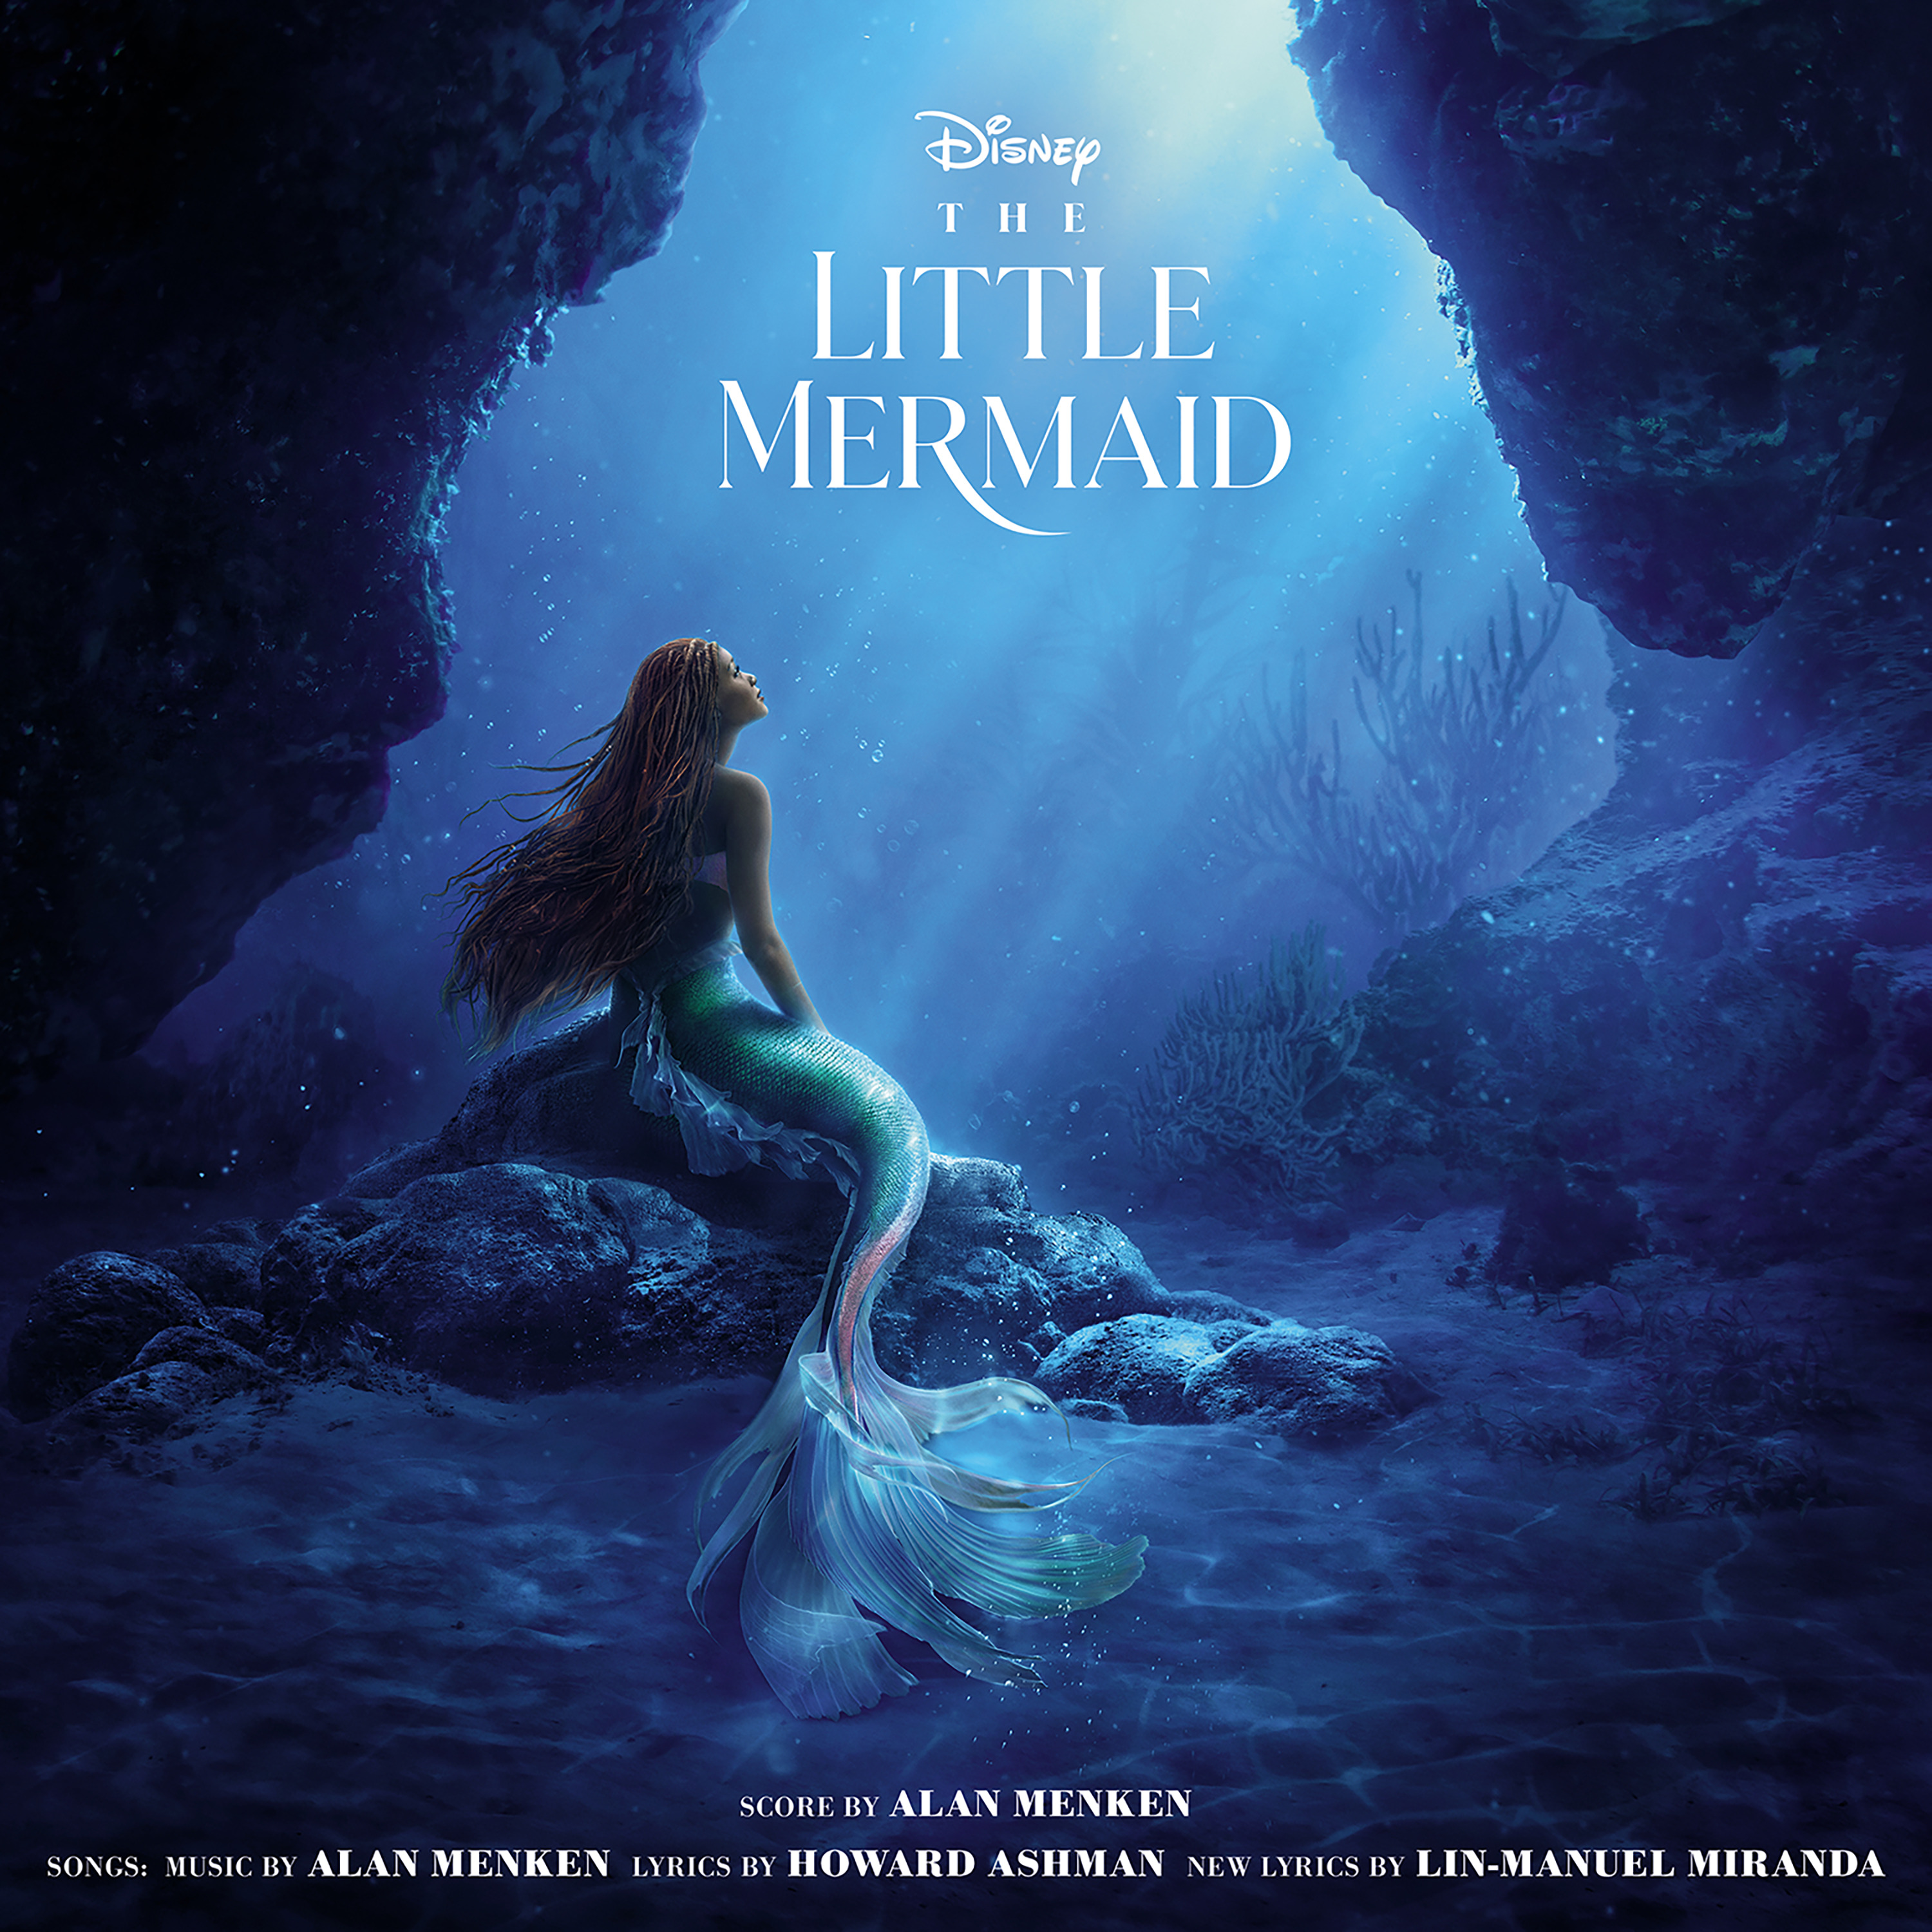 https://static.wikia.nocookie.net/disney/images/5/51/The_Little_Mermaid_%282023_soundtrack%29.jpg/revision/latest?cb=20230519153934